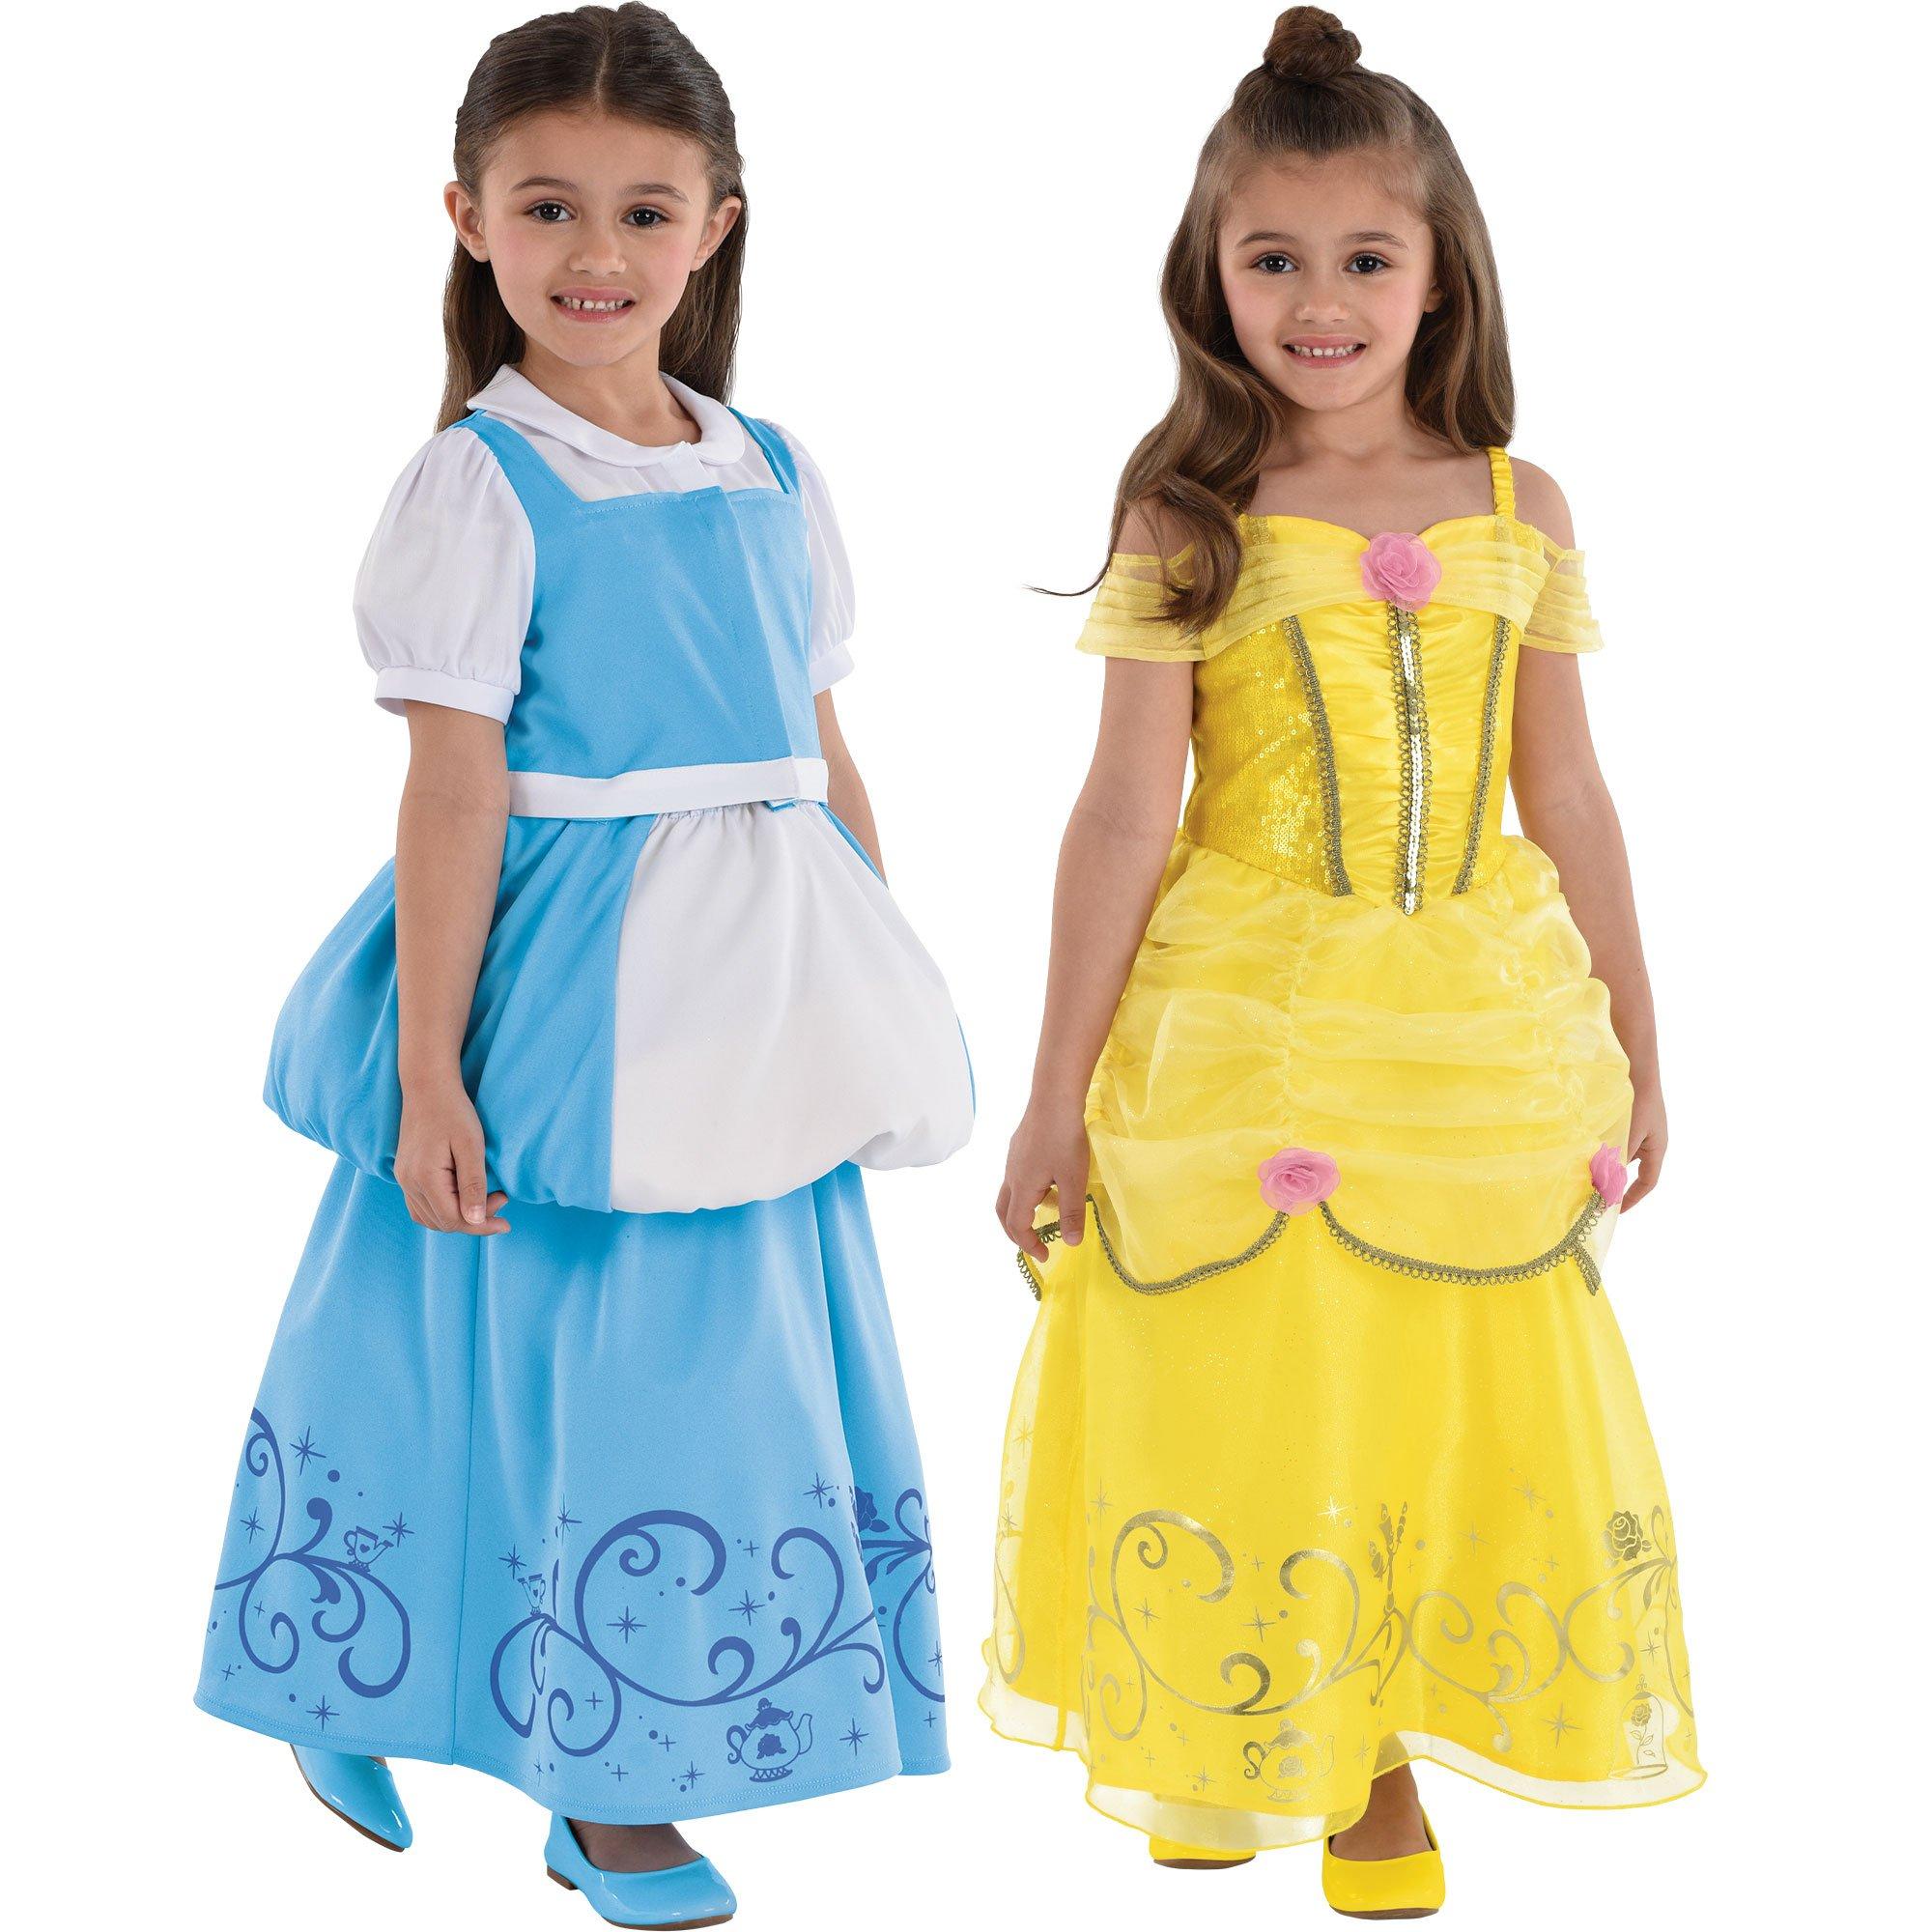 Kids' Transforming 2-in-1 Belle Costume - Disney Beauty and the